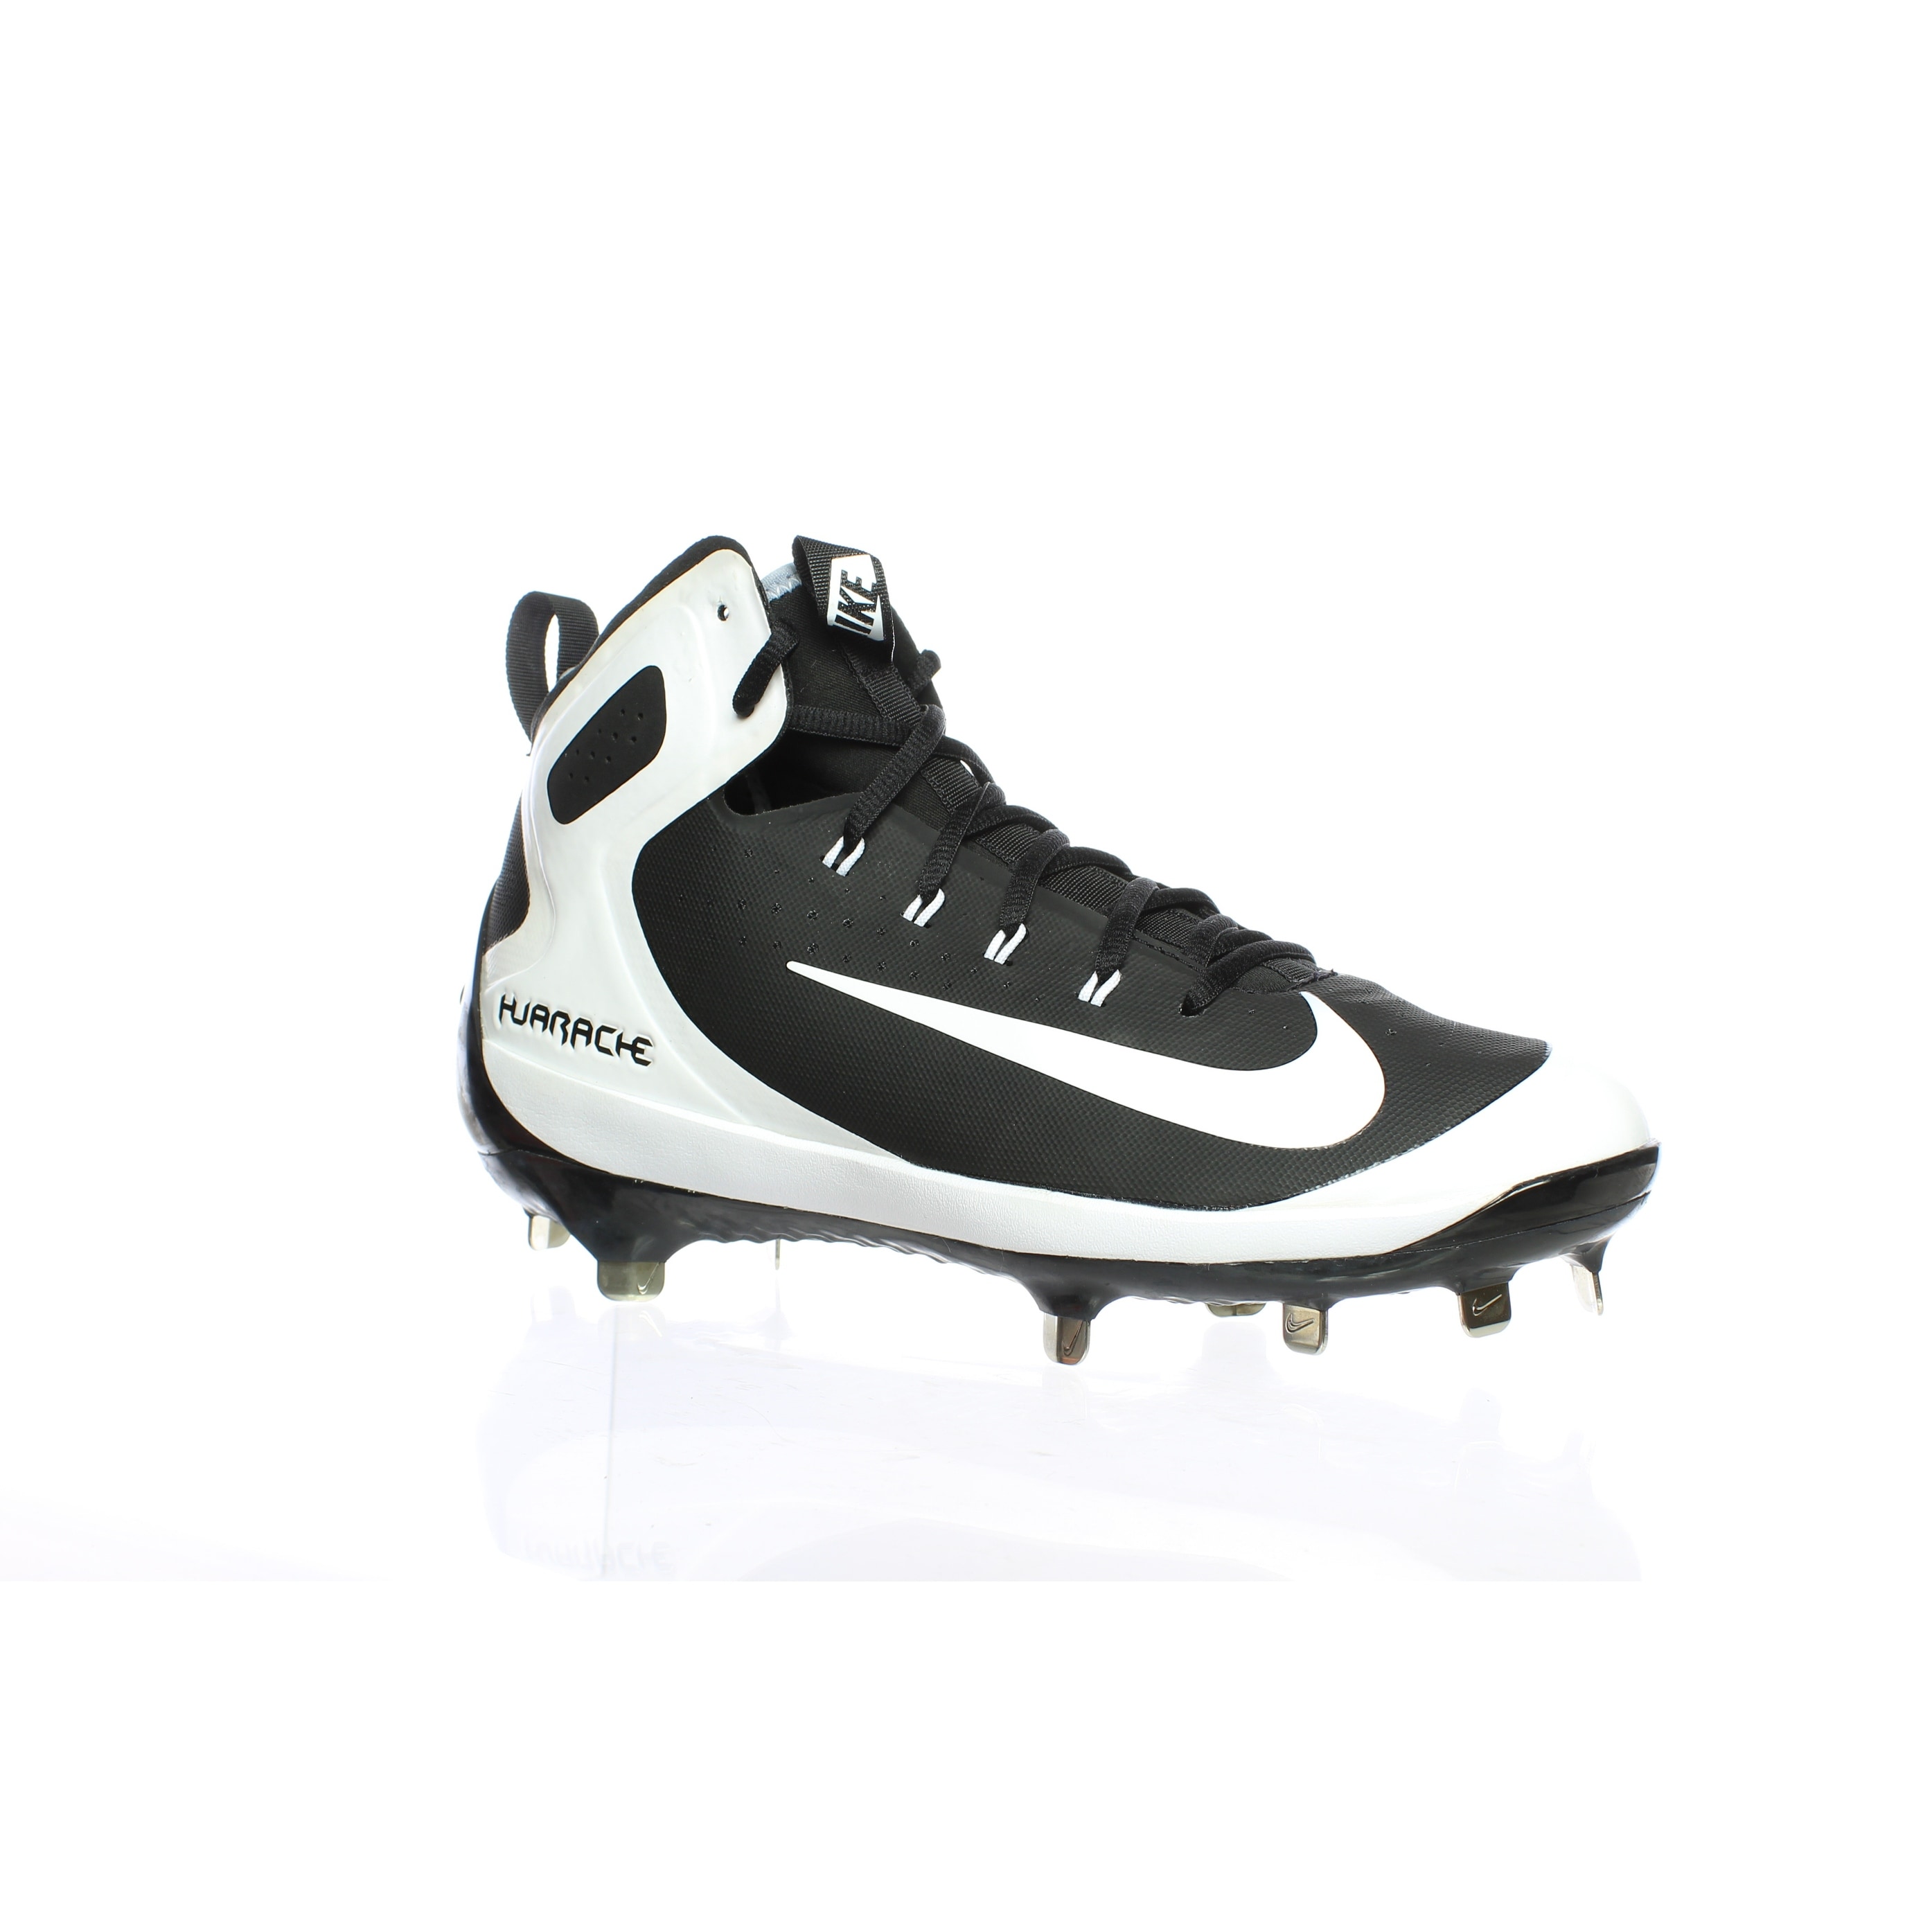 mens size 8 football cleats